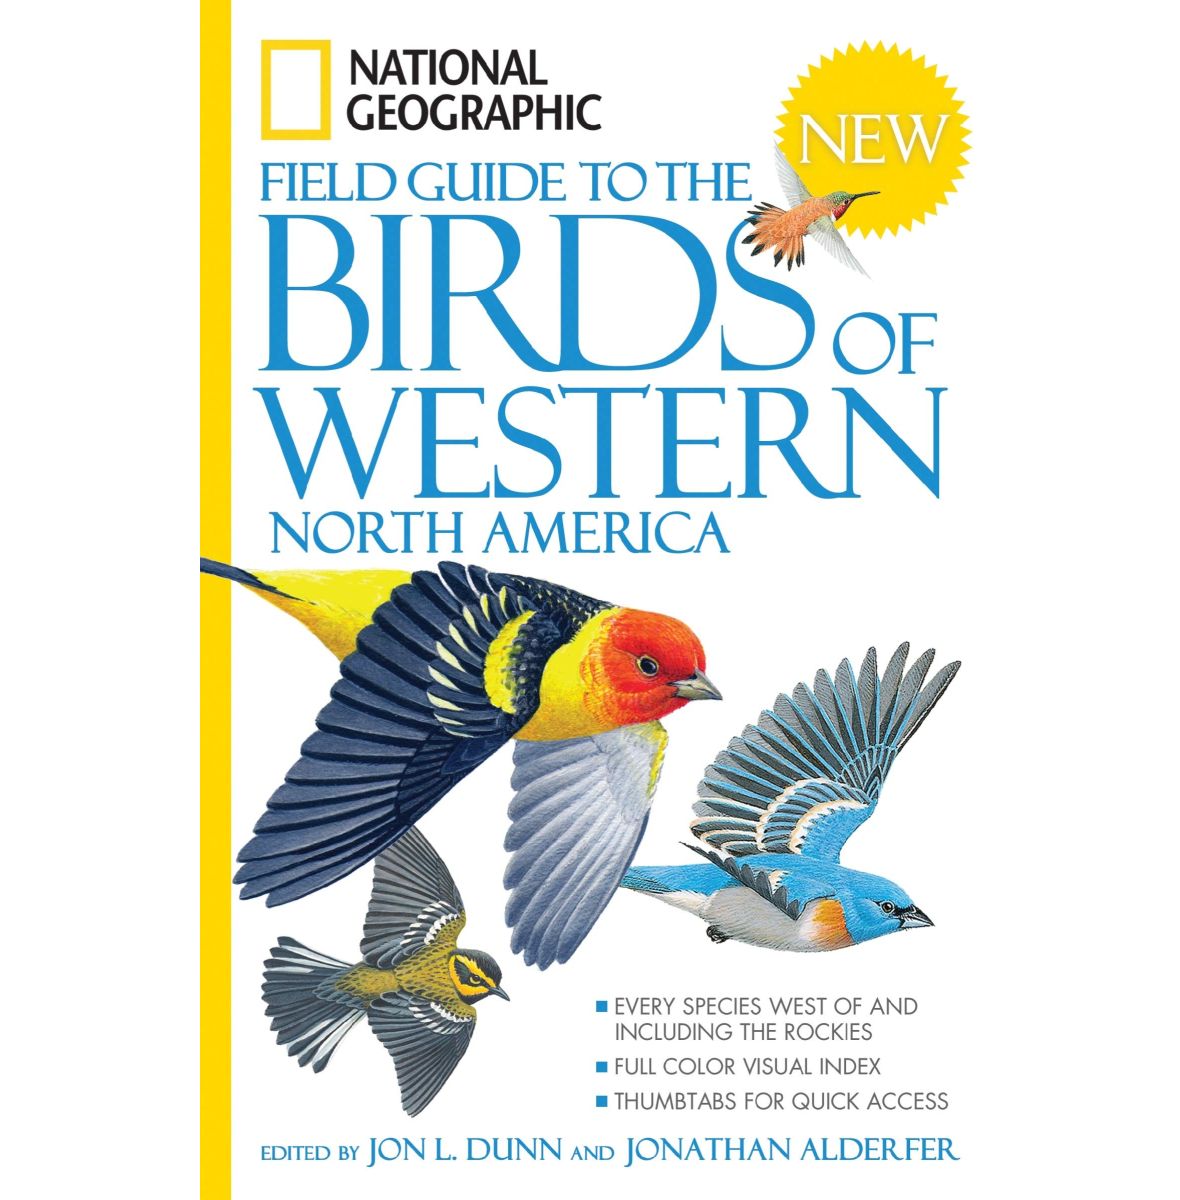 Nat'l Geographic Field Guide To Birds Western N.A.